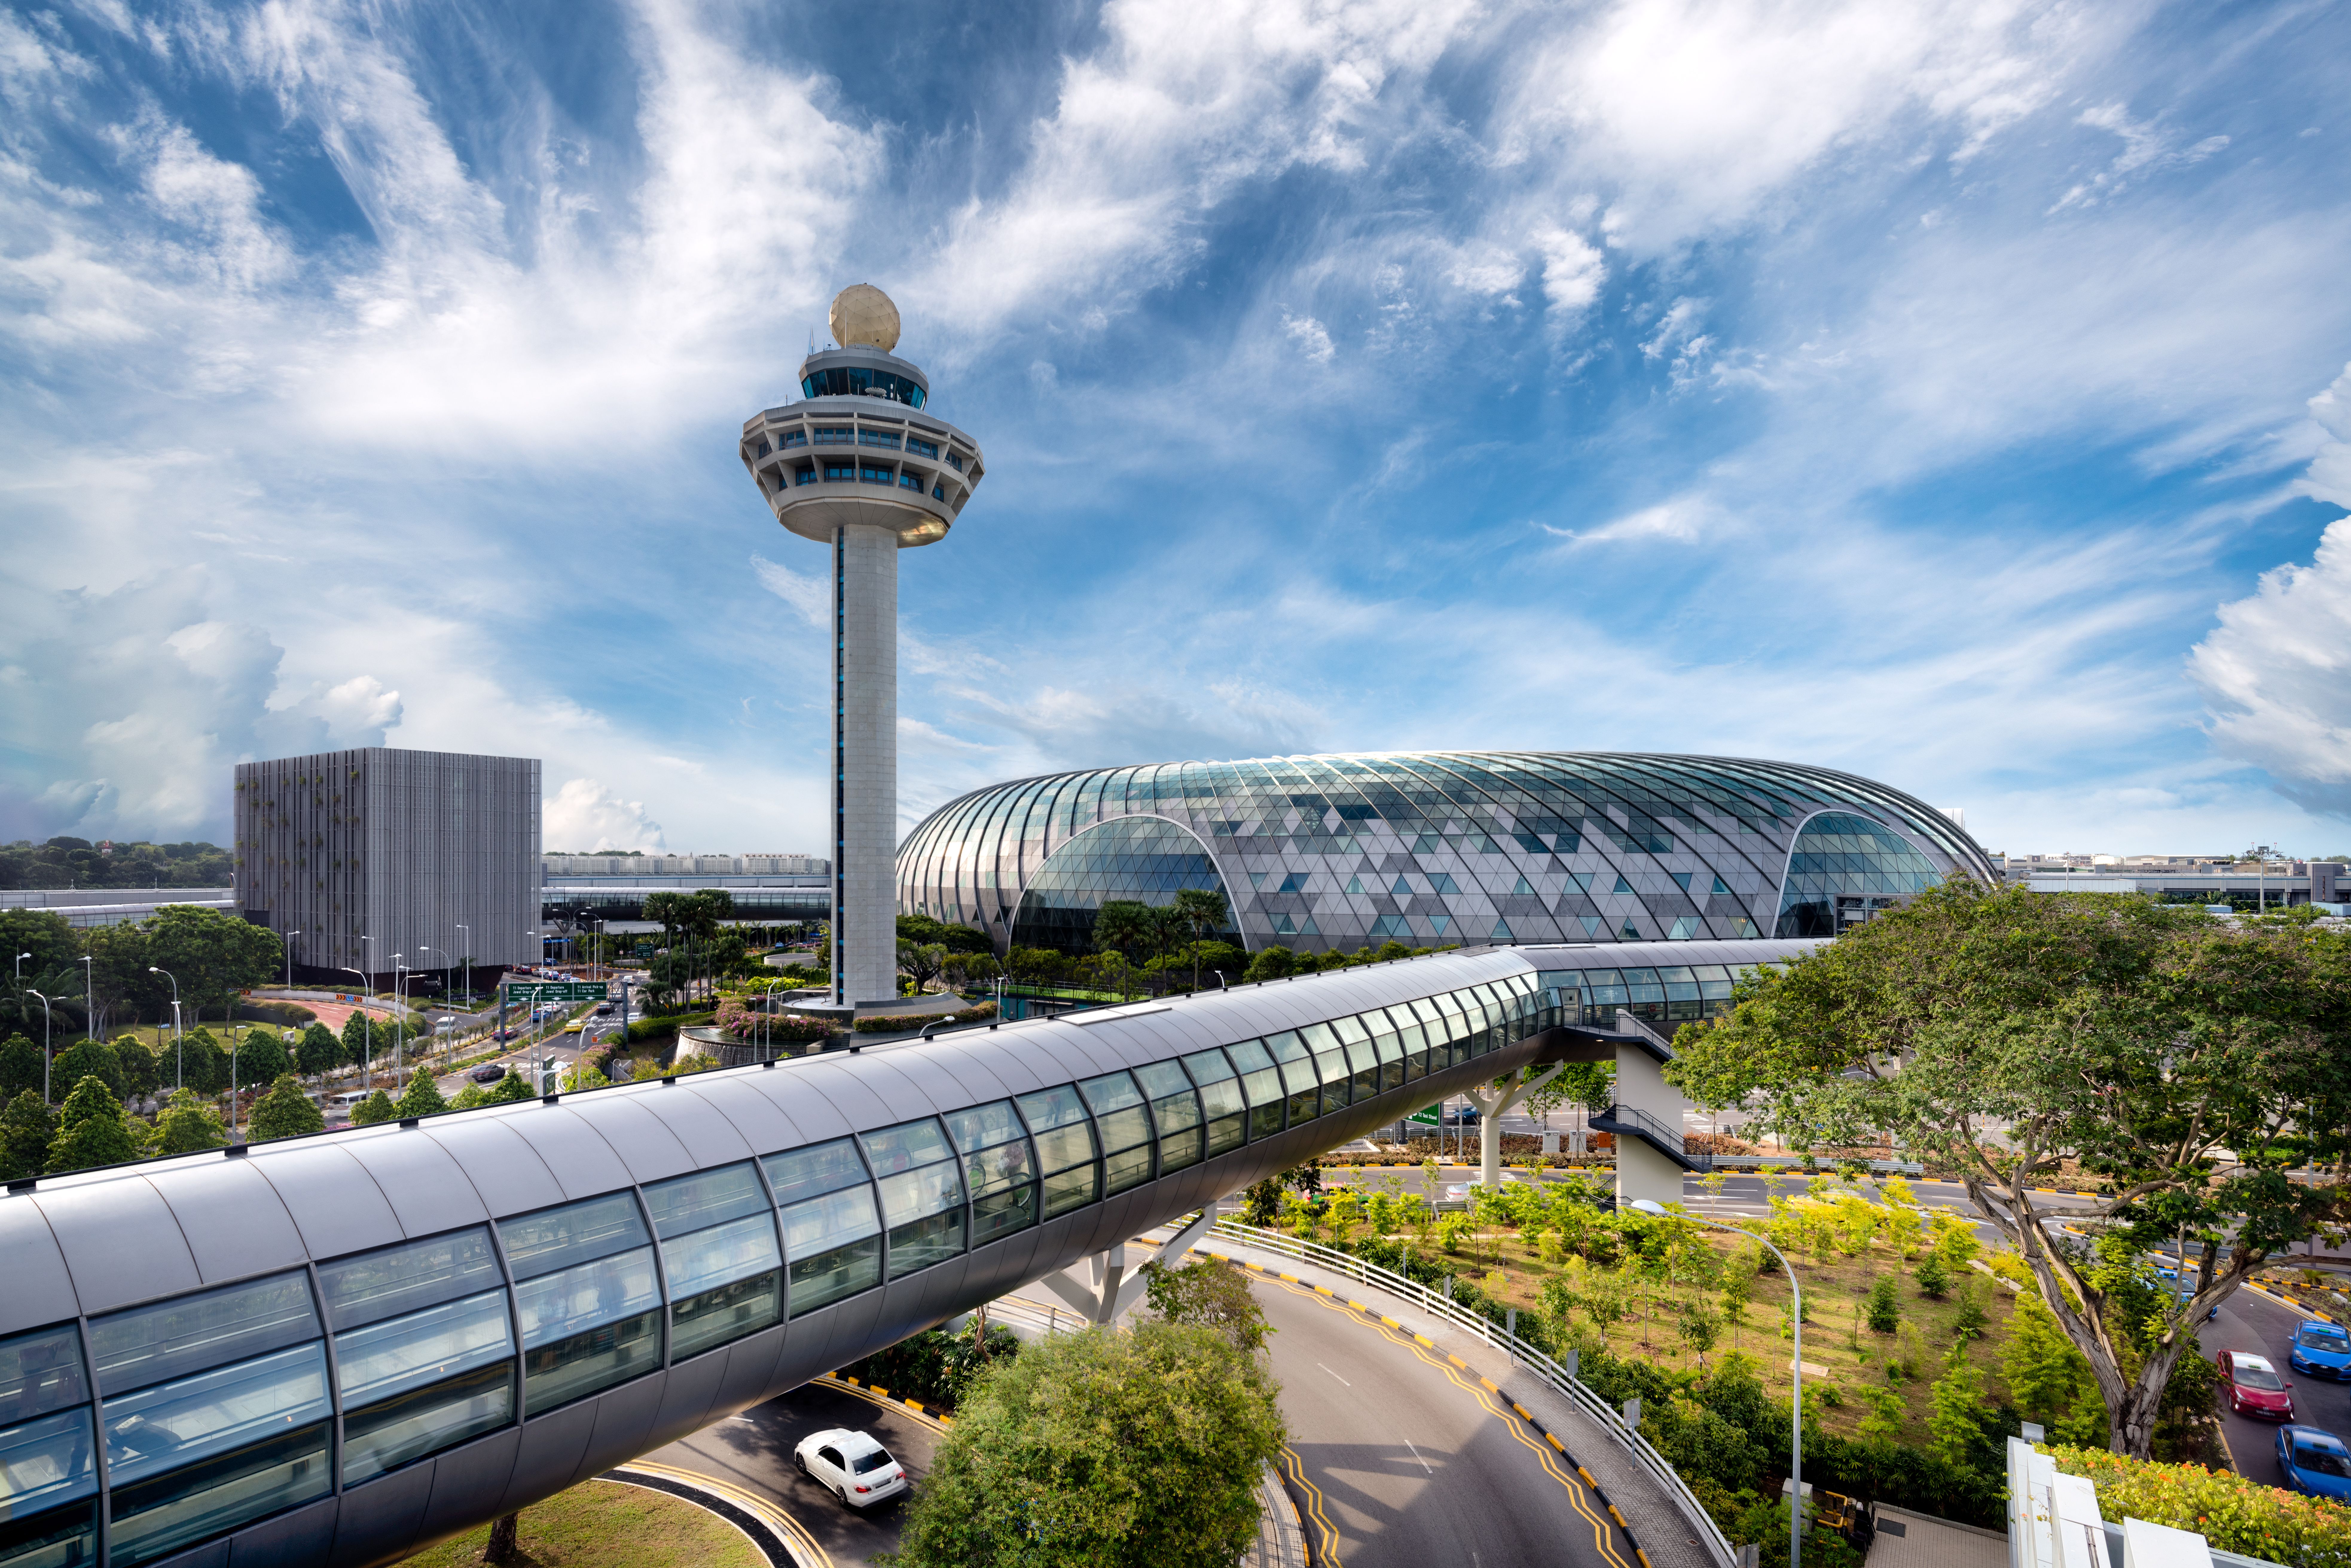 Flying out of Changi Airport? You'll have to pay extra charges and fees